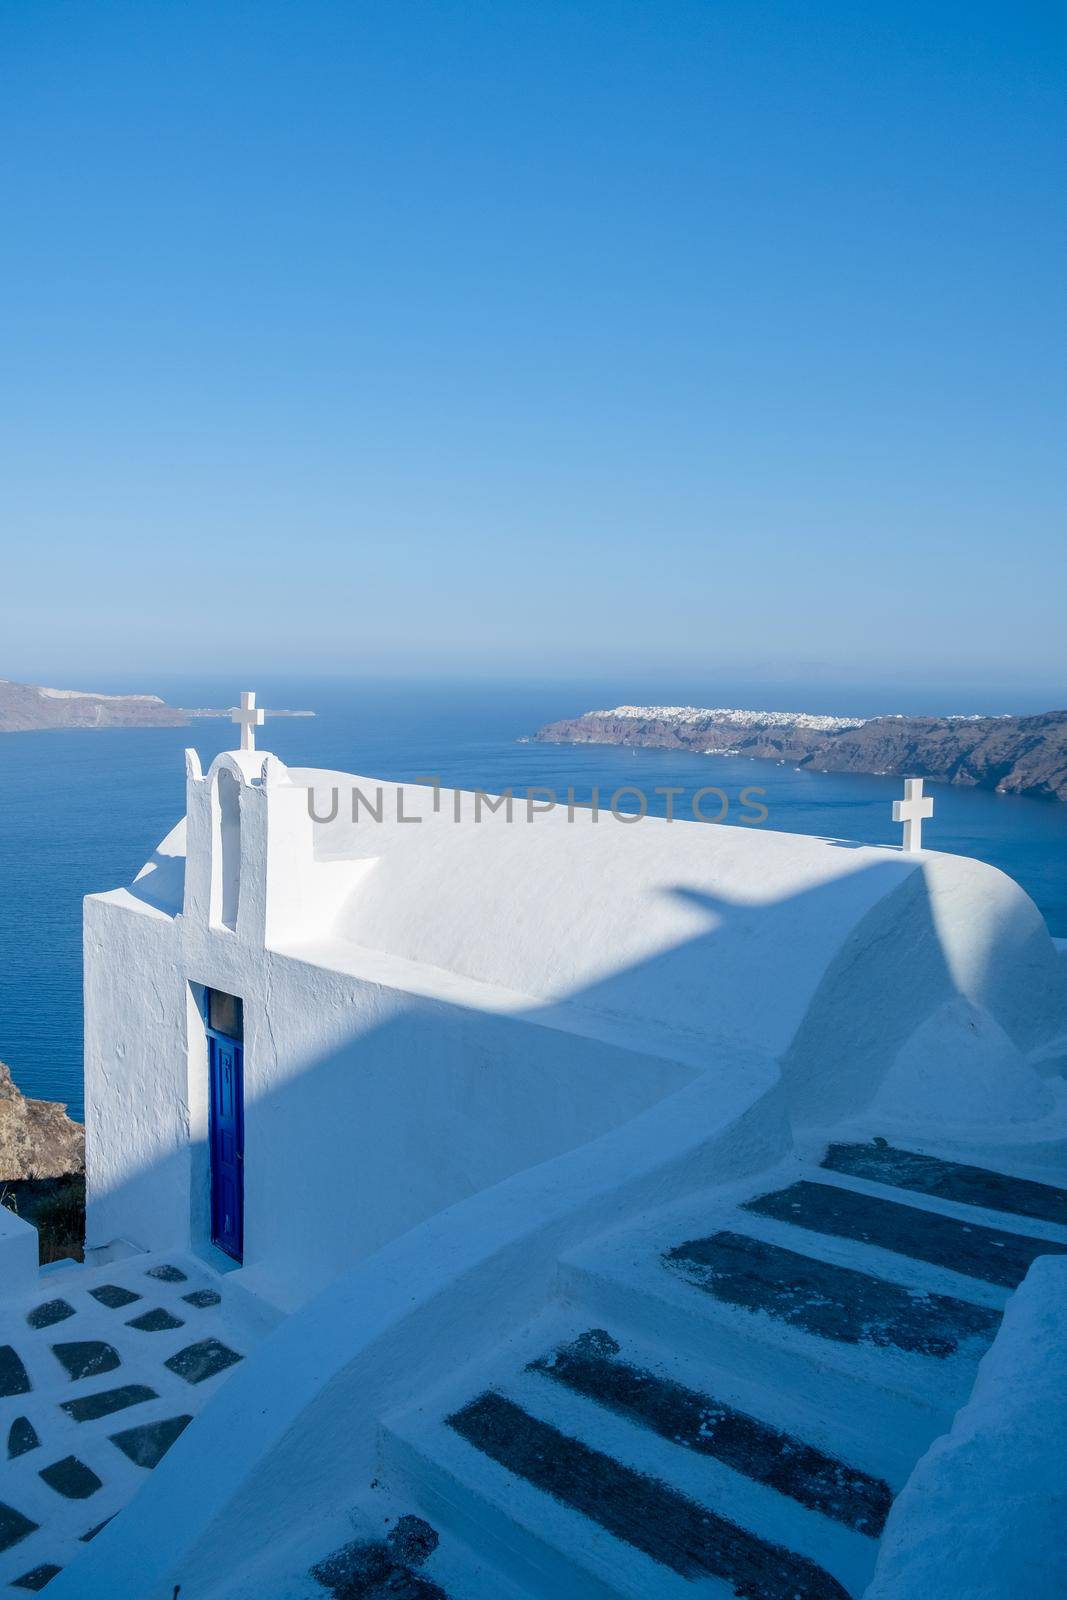 White church at Fira Santorini, Panoramic view of mountains, sea and nature from Fira town, Santorini island Greece. View of the caldera and ships in the bay of Santorini